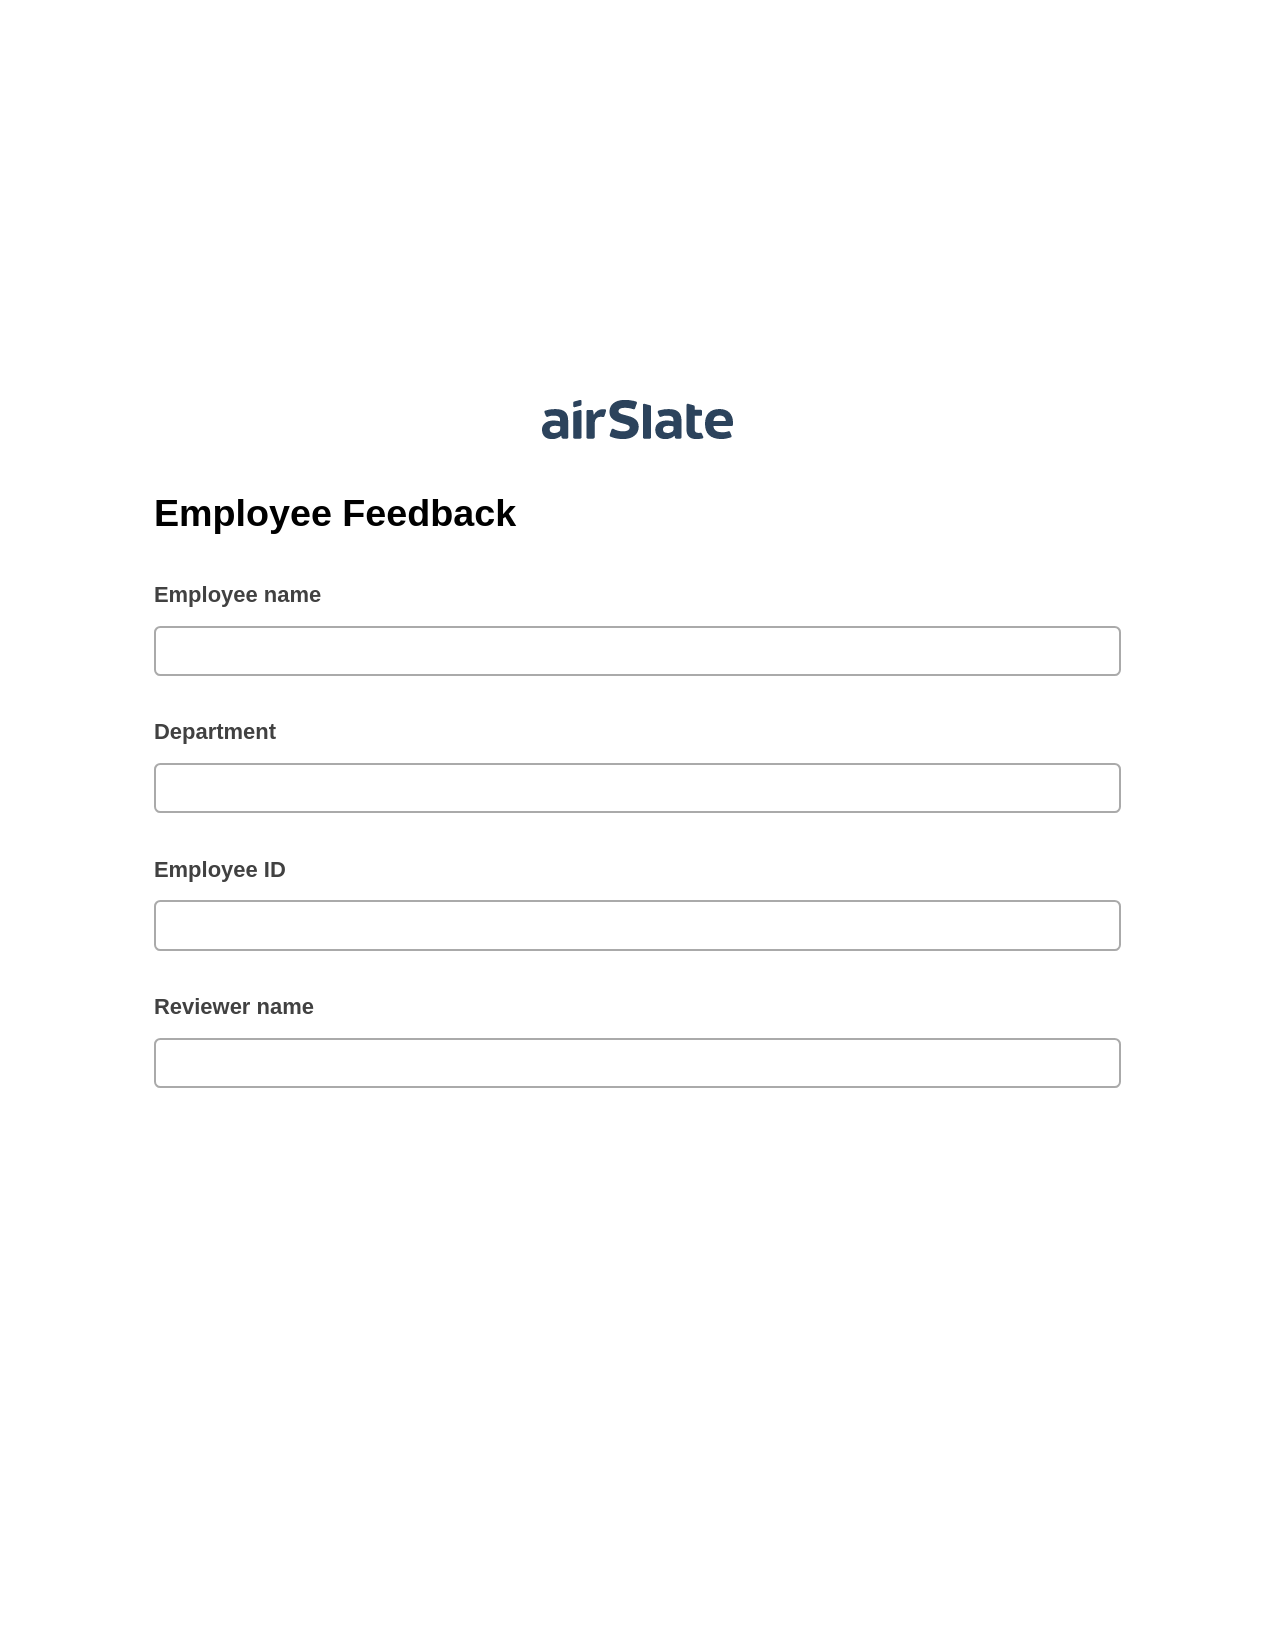 Employee Feedback Pre-fill from Salesforce Record Bot, Roles Reminder Bot, Export to Smartsheet